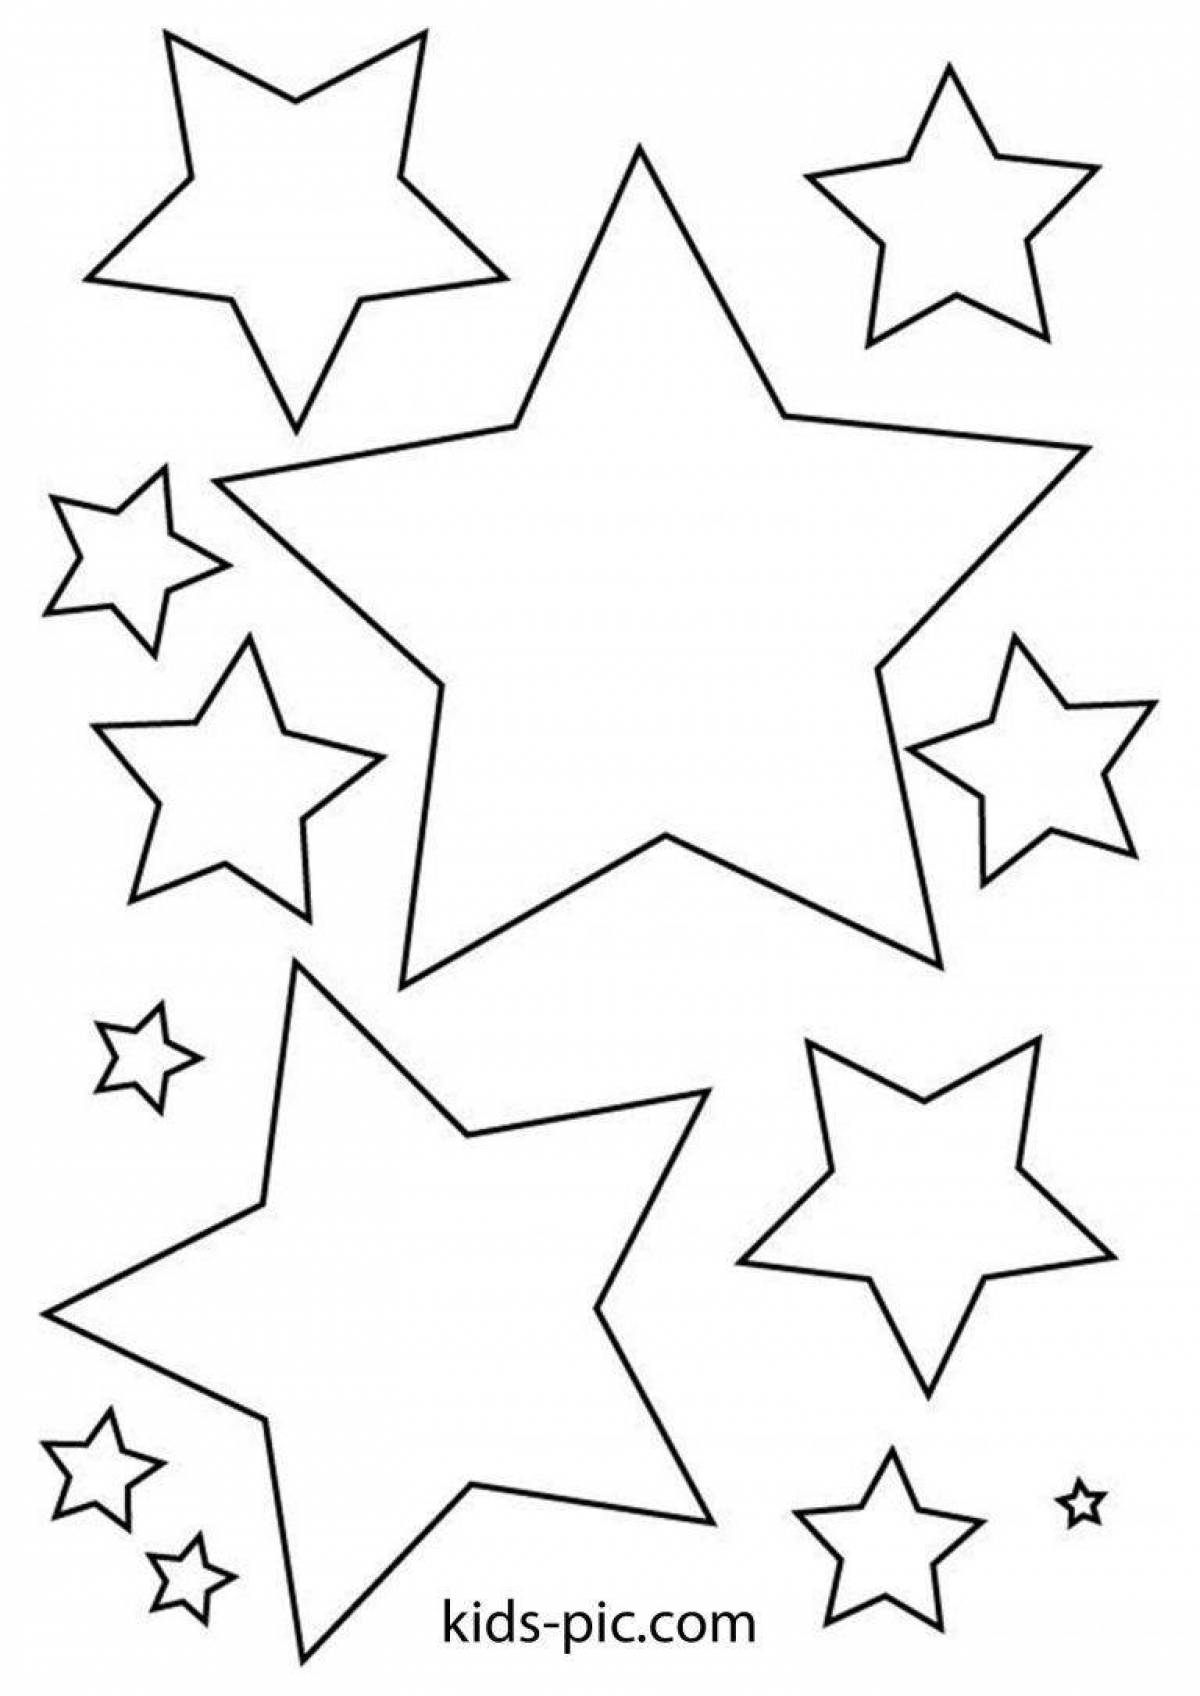 Coloring book bewitching star